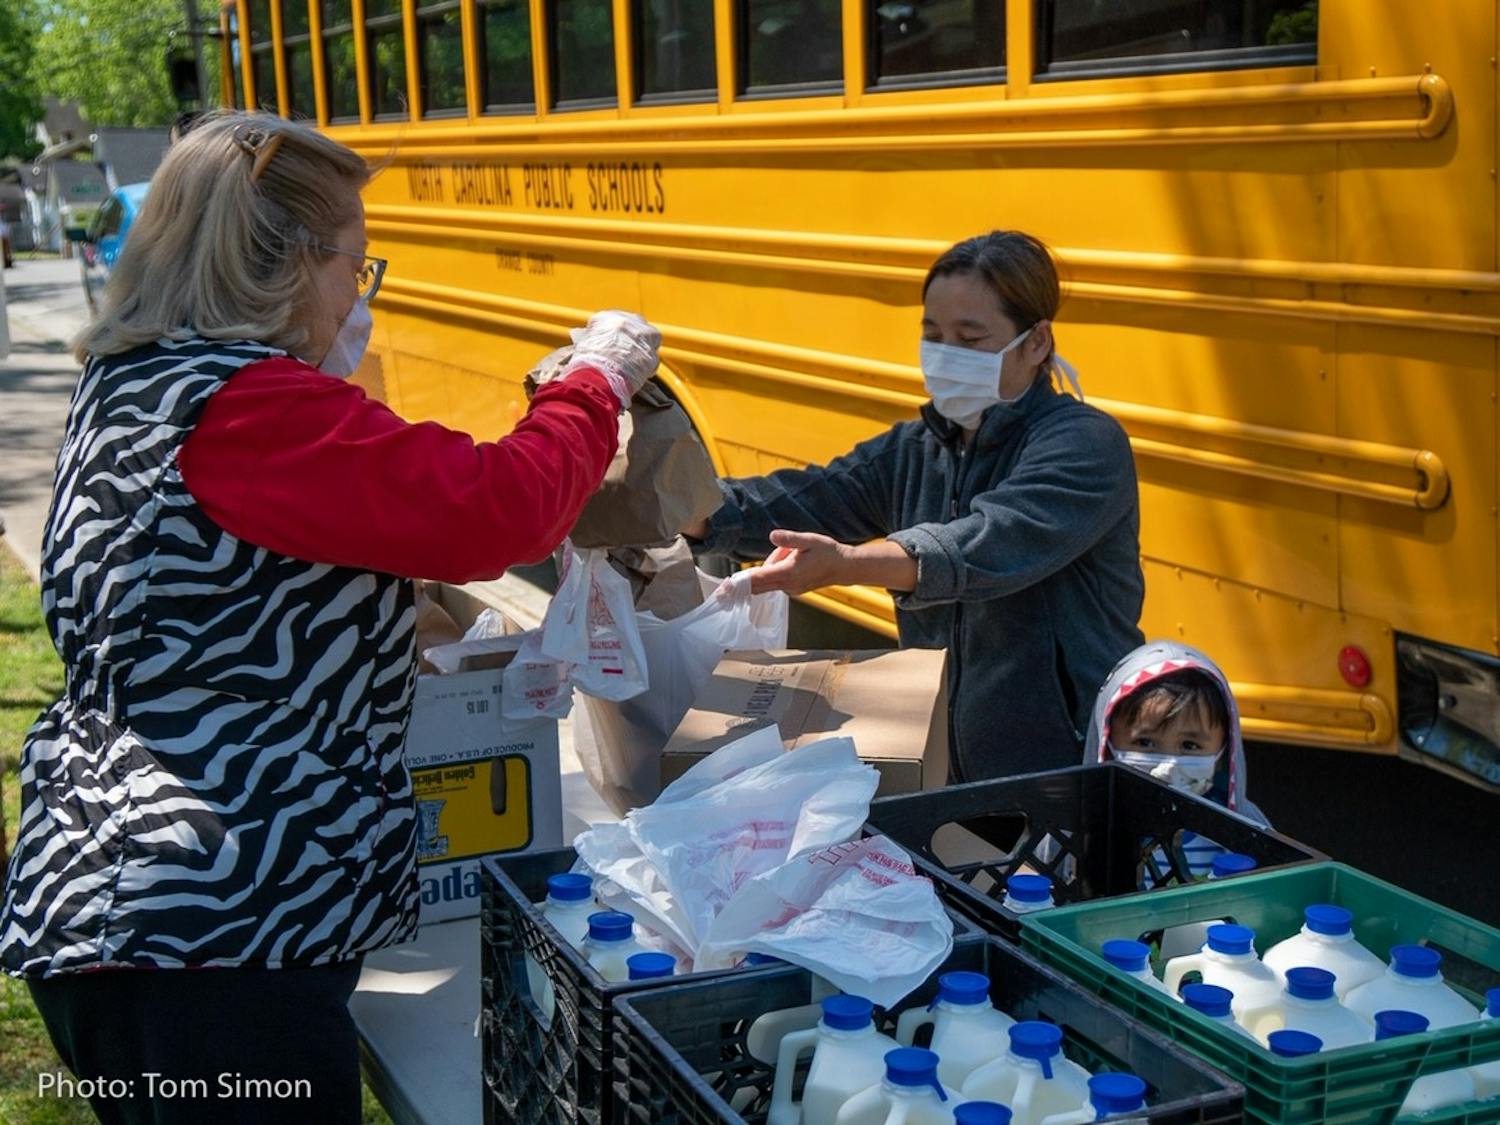 Food is bagged and loaded onto the school bus as part of the Food for Students Program. Photo by Tom Simon.